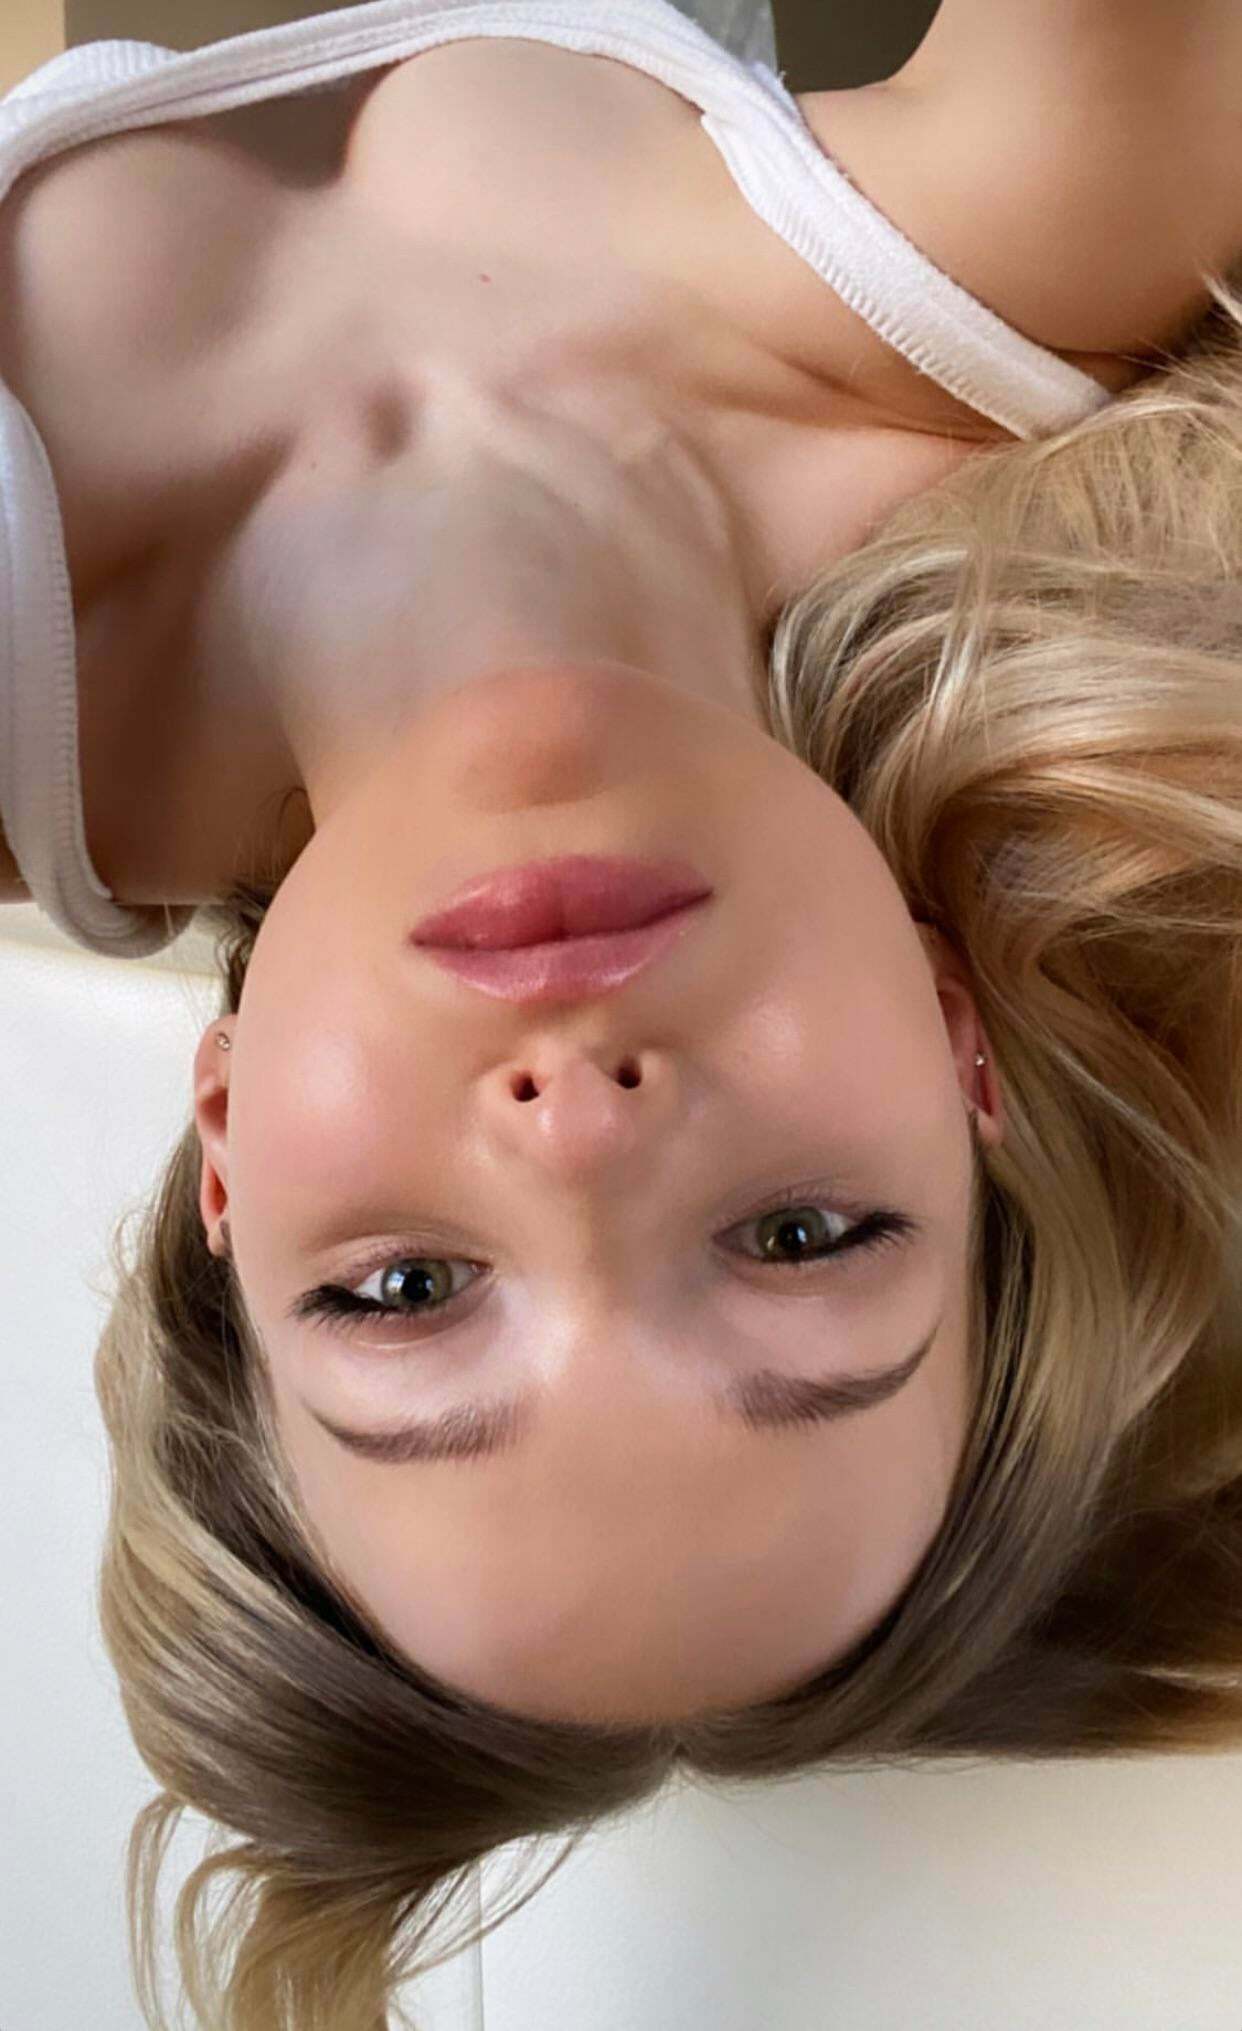 Would love to fuck Dove Camerons face with shes upside